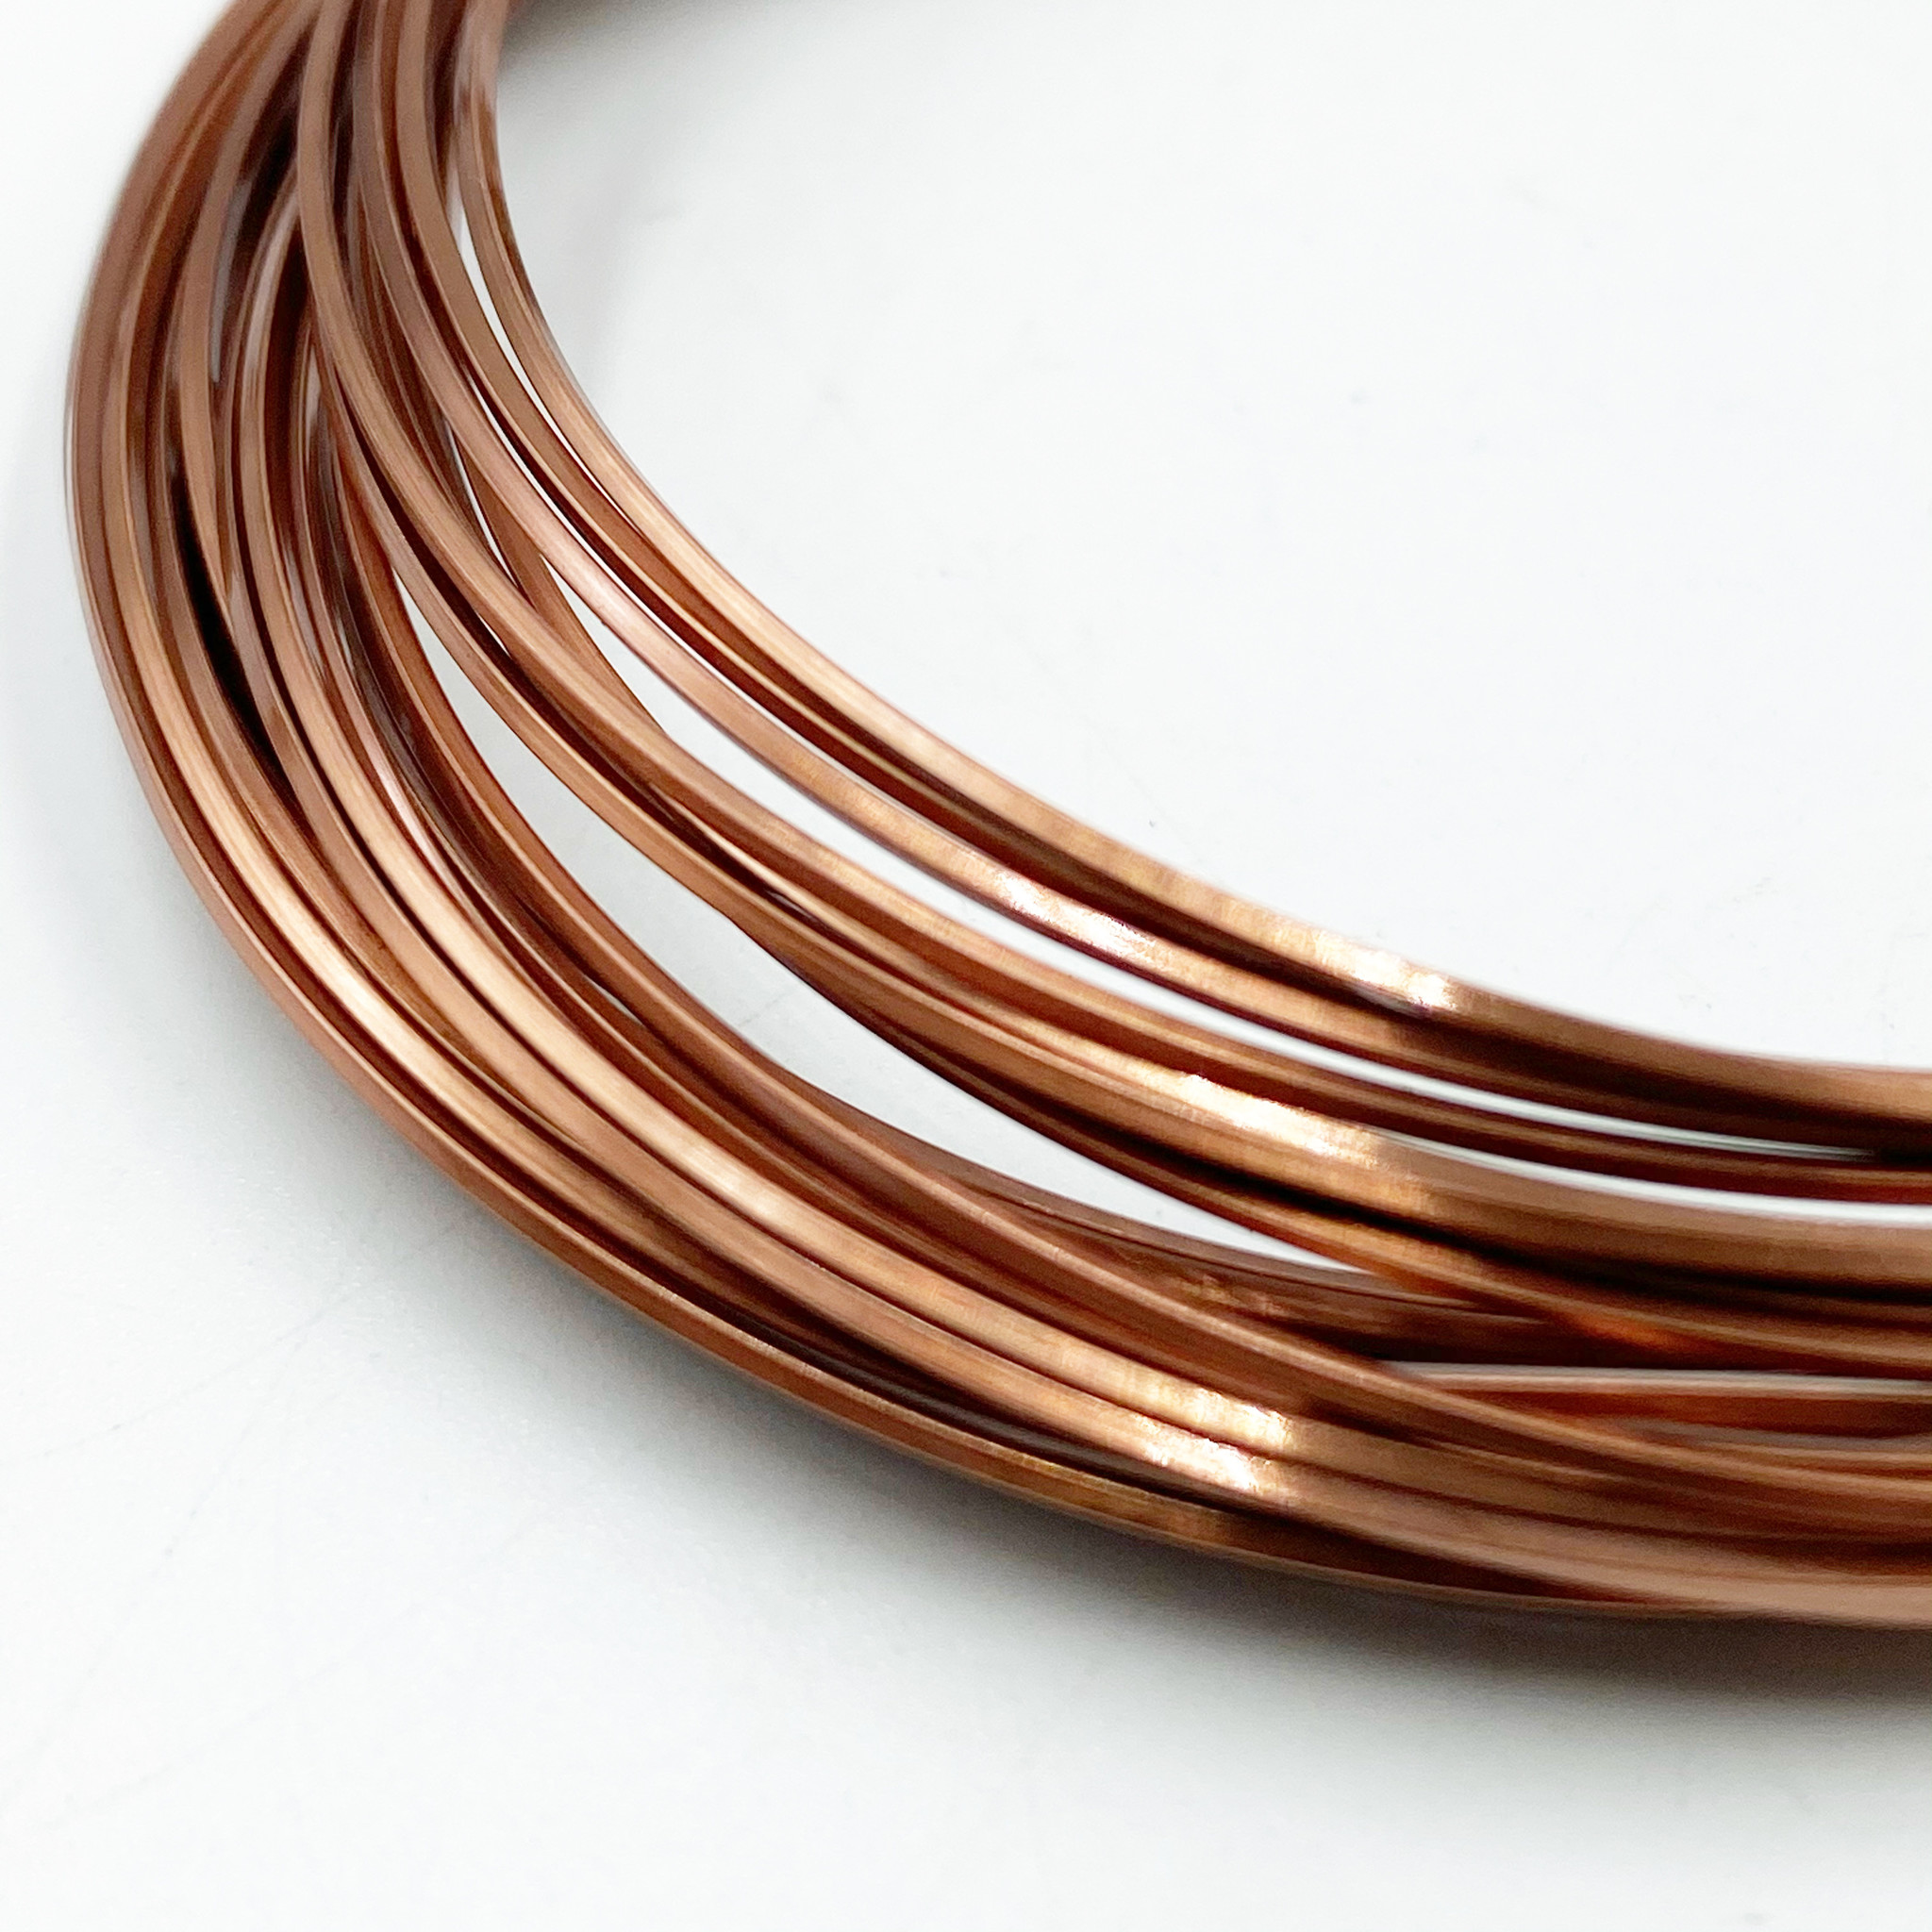 Copper Craft Wire, Parawire 18ga Faux Gold Enameled 50' Roll